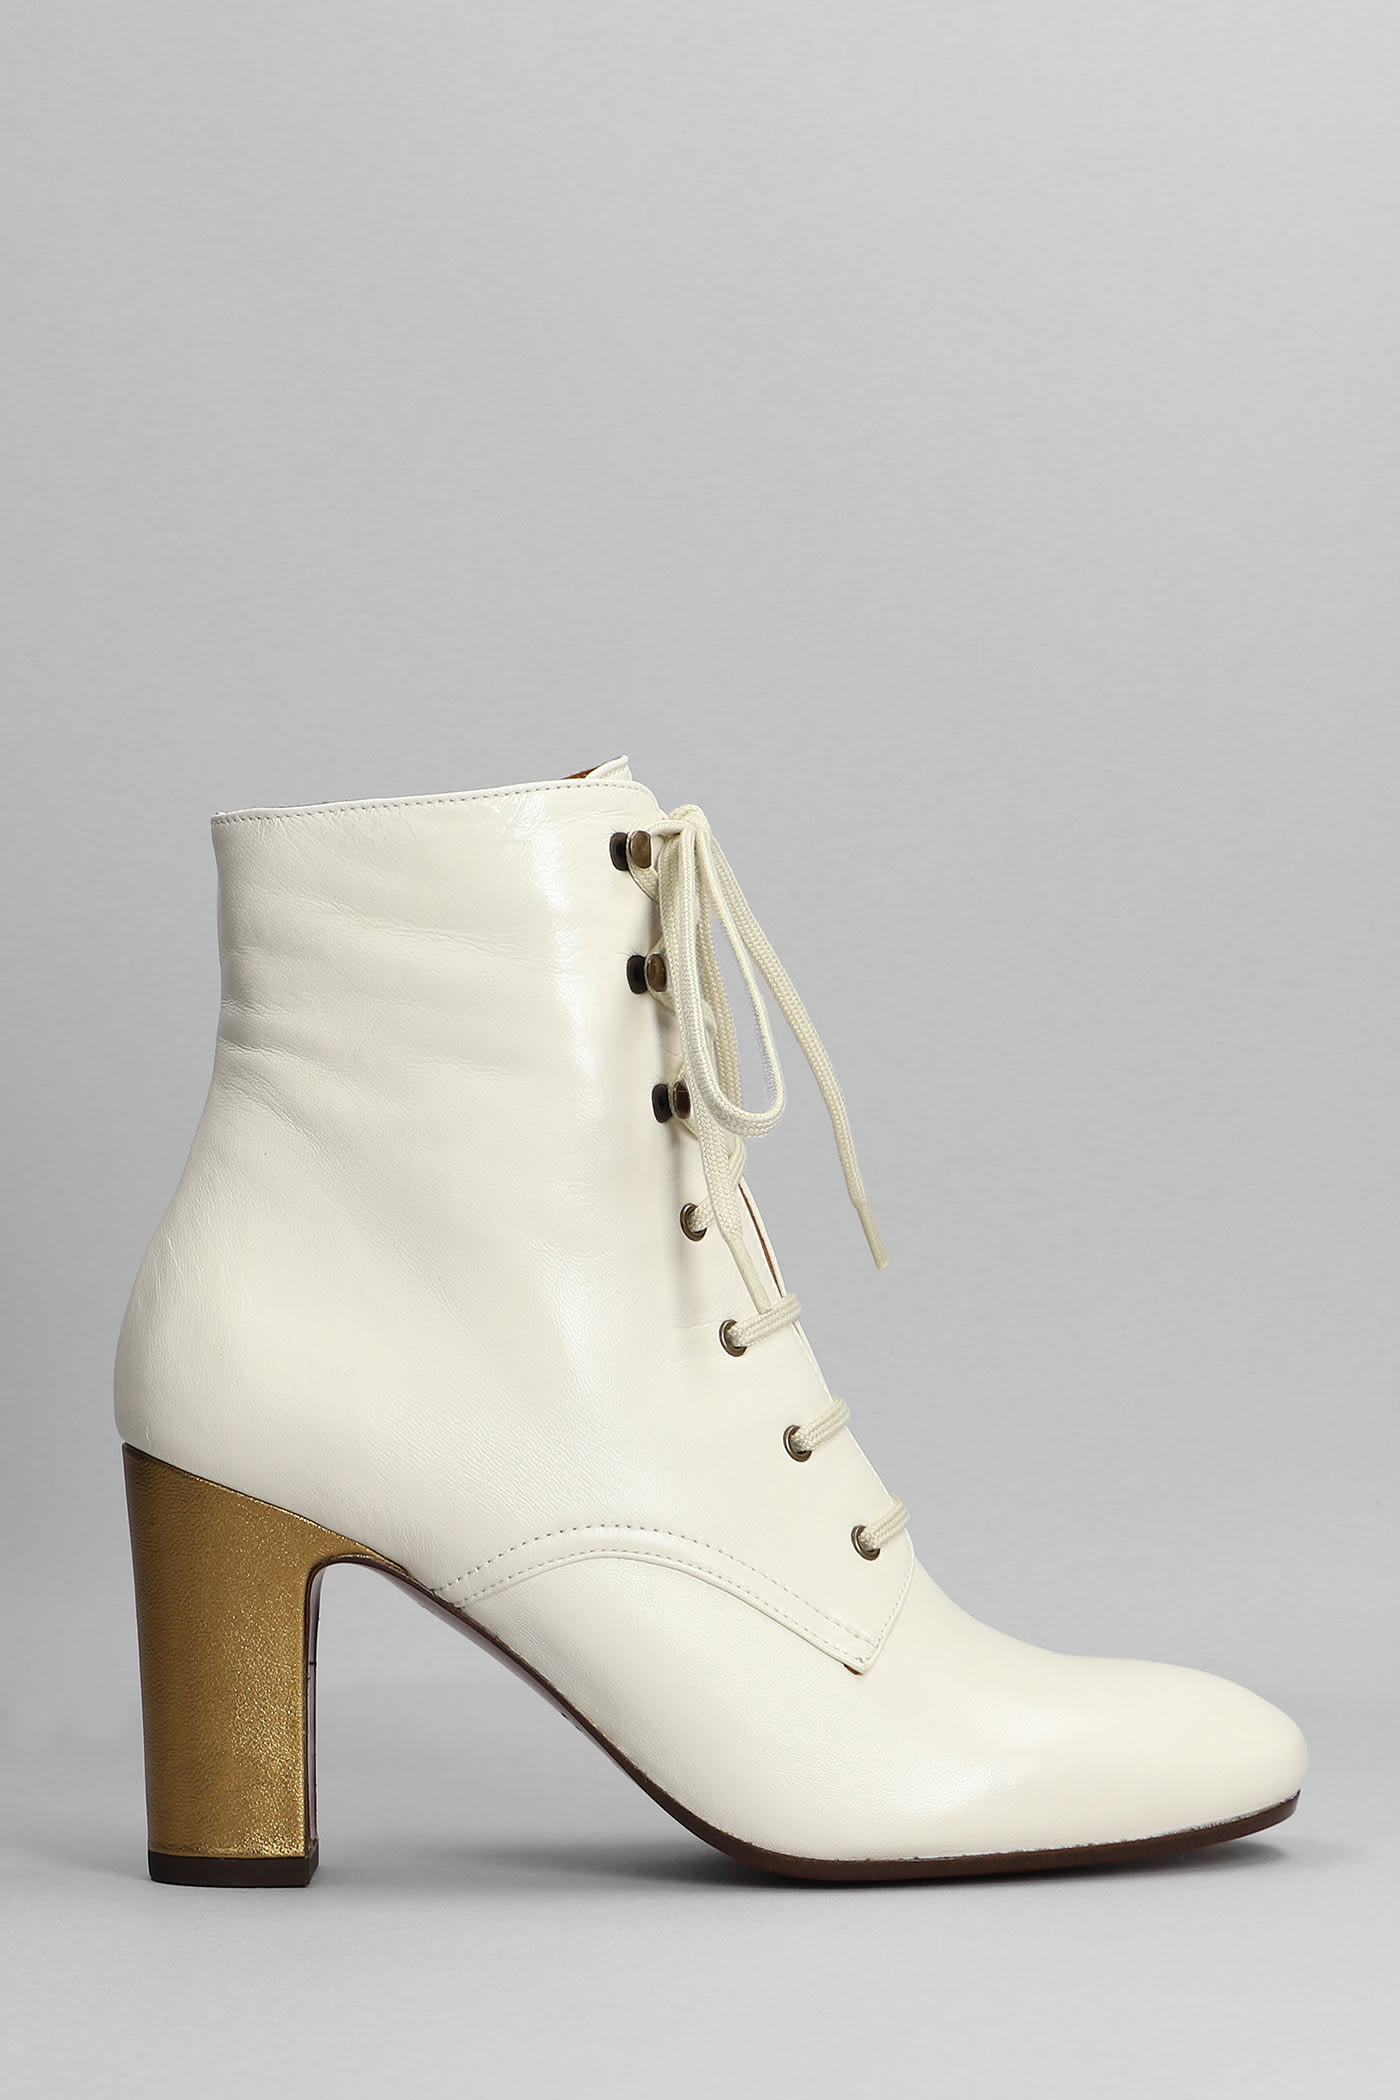 Chie Mihara Walala High Heels Ankle Boots In Beige Leather